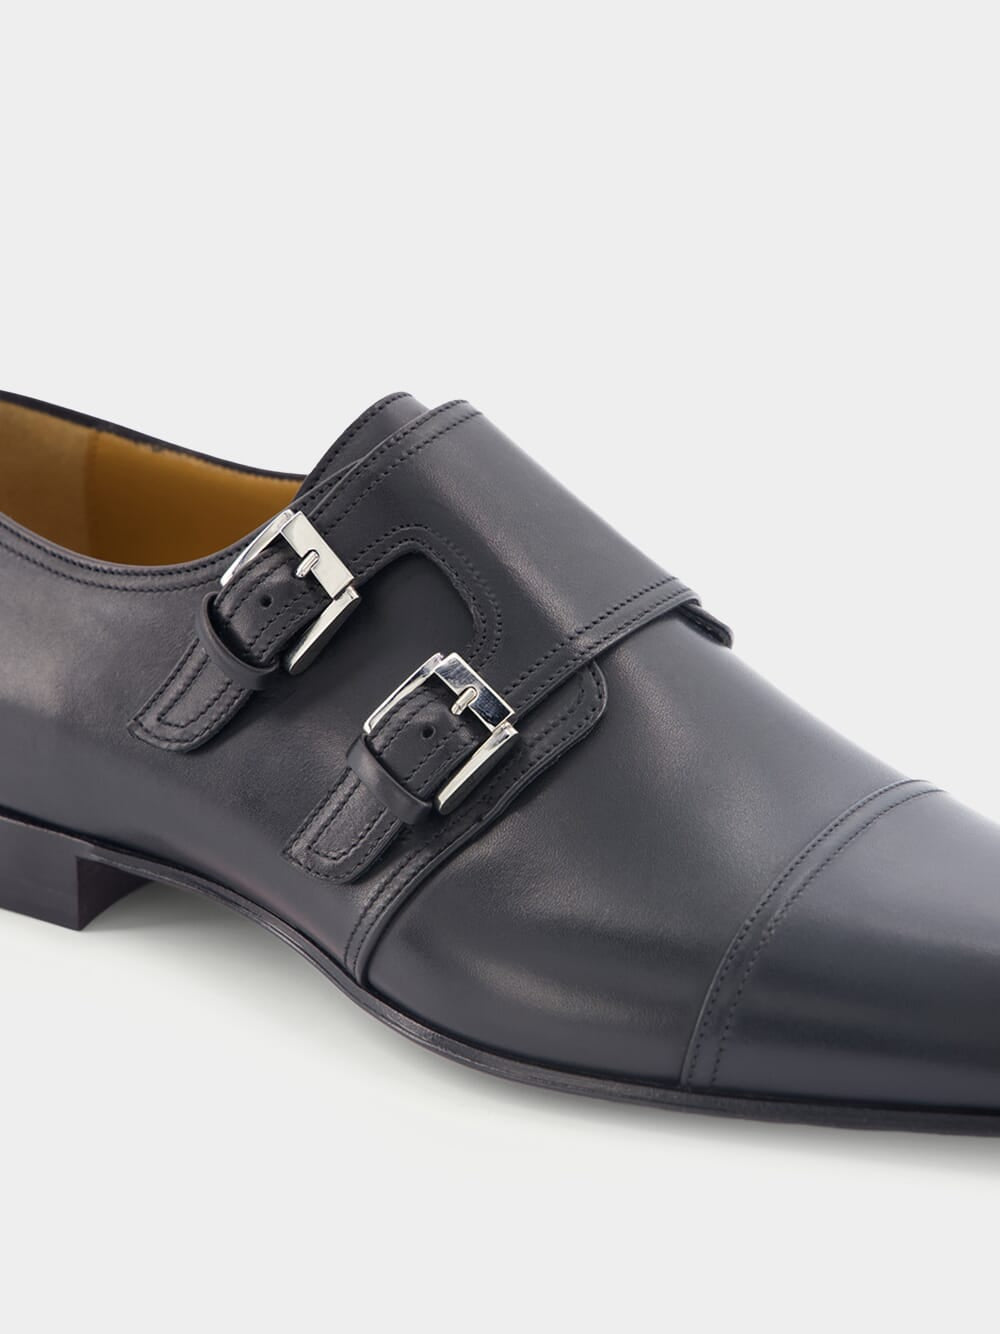 Mortimer double buckle leather shoes